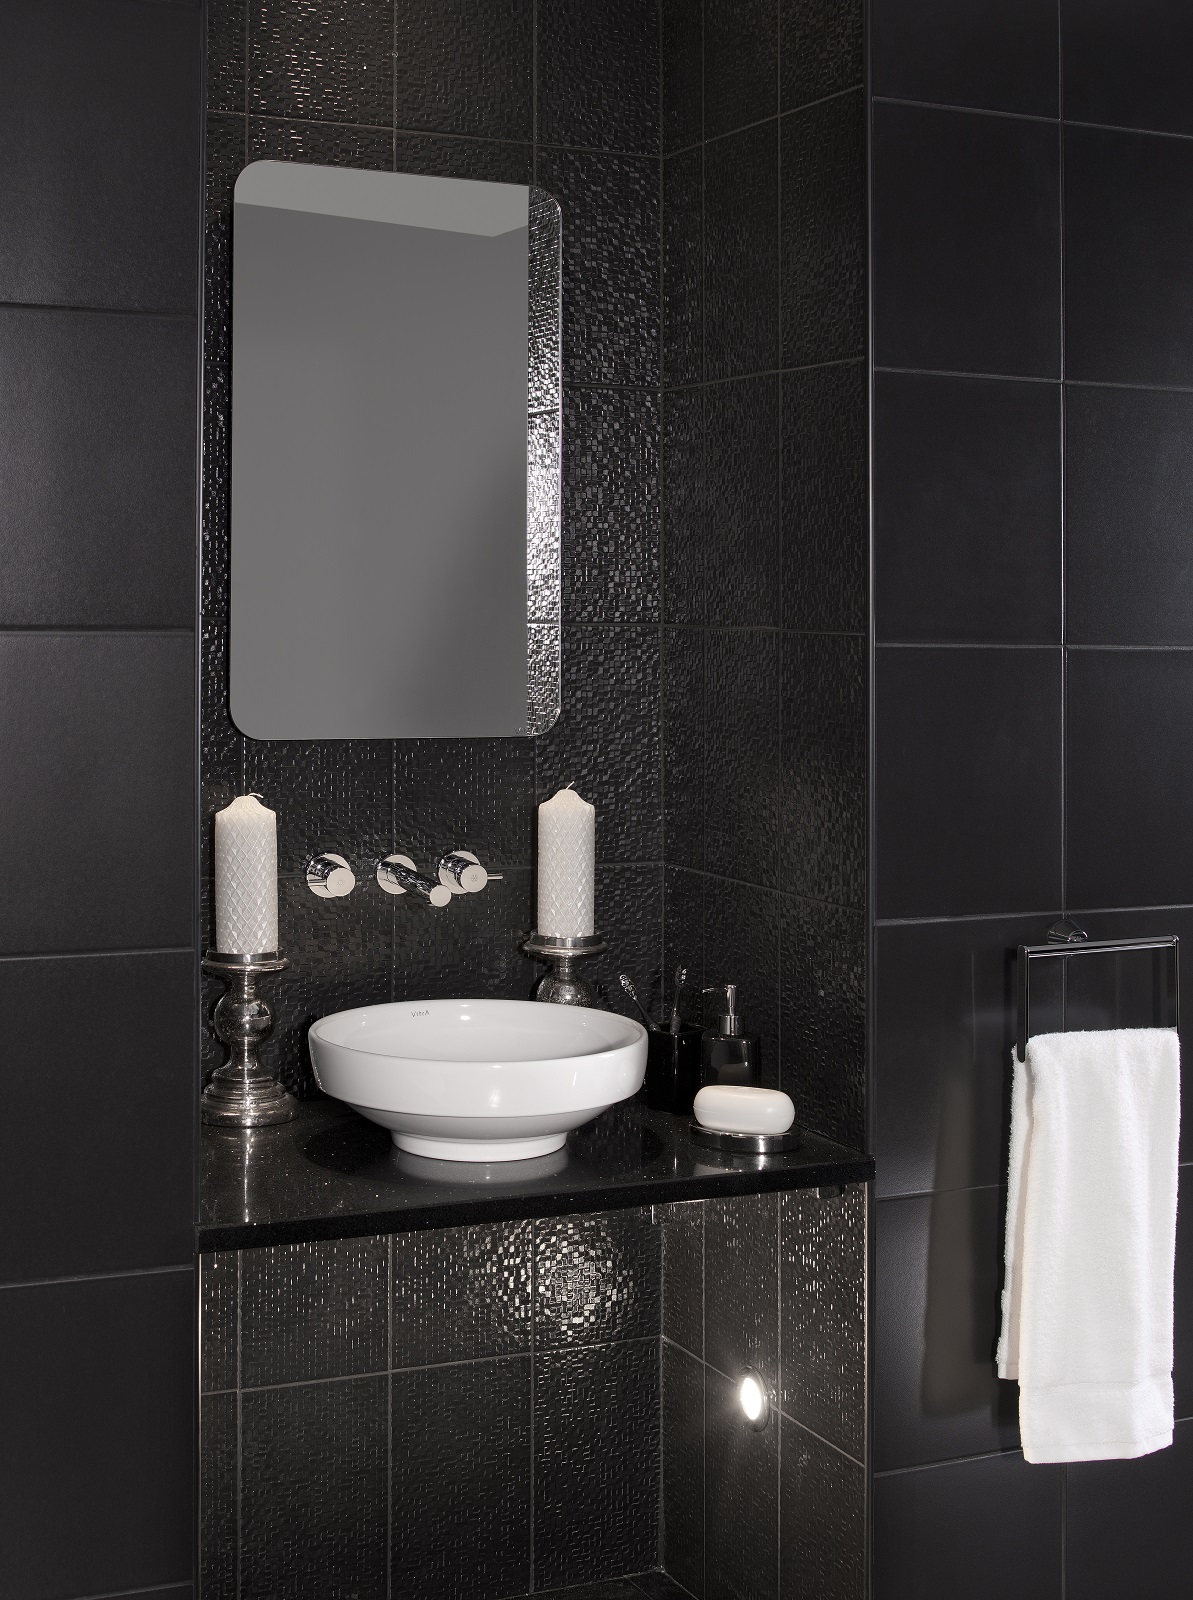 Lifestyle image of a black bathroom design, featuring differently textured black wall tiles